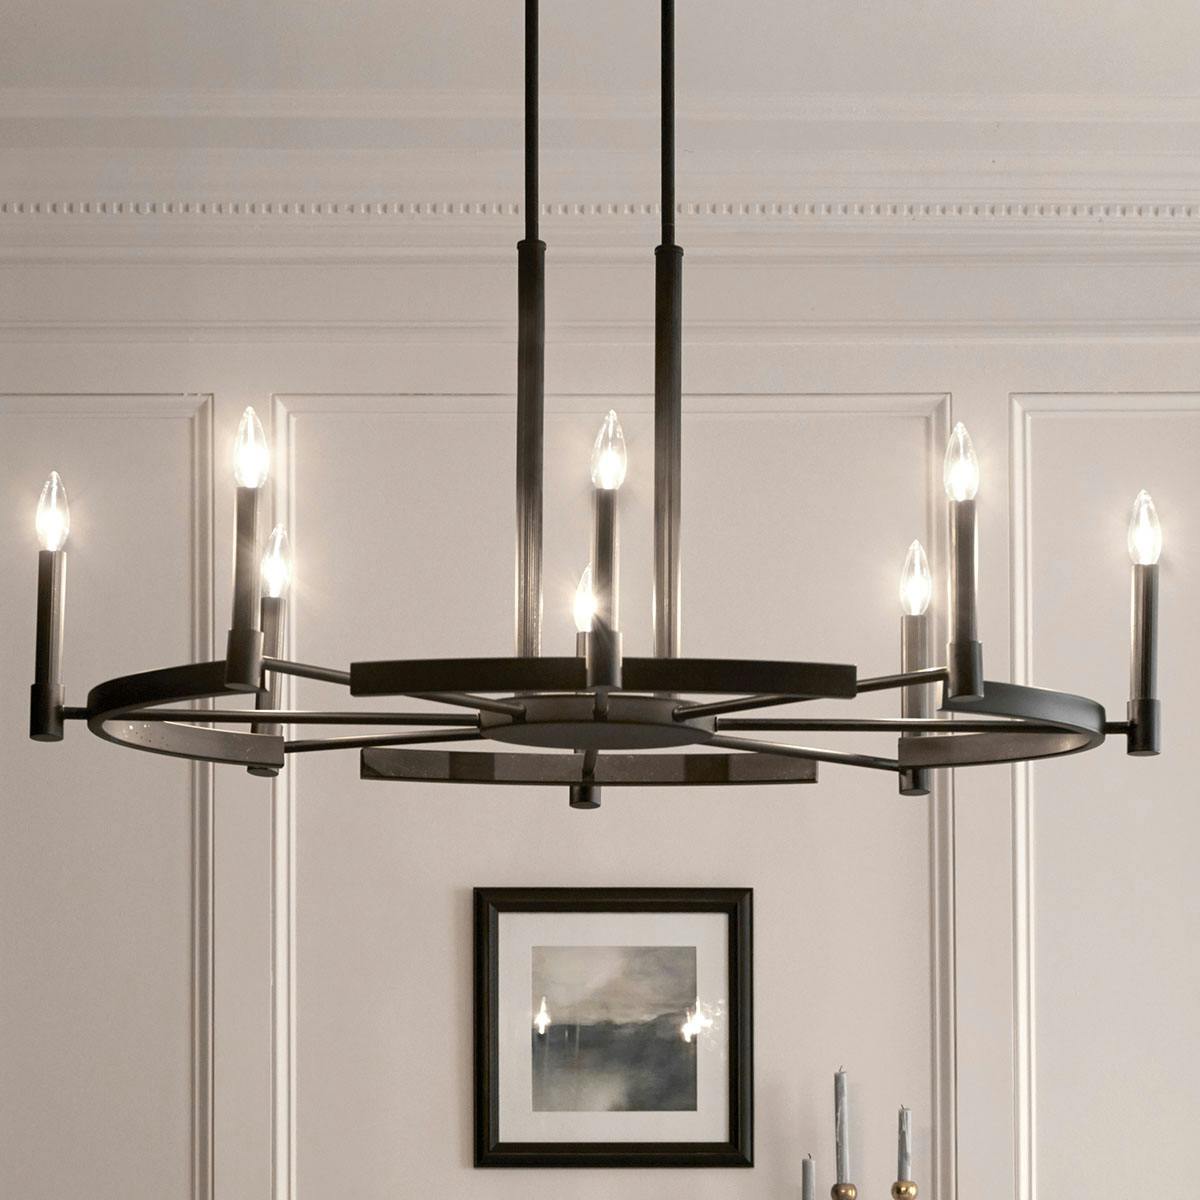 Day time Dining Room image featuring Tolani chandelier 52429BK